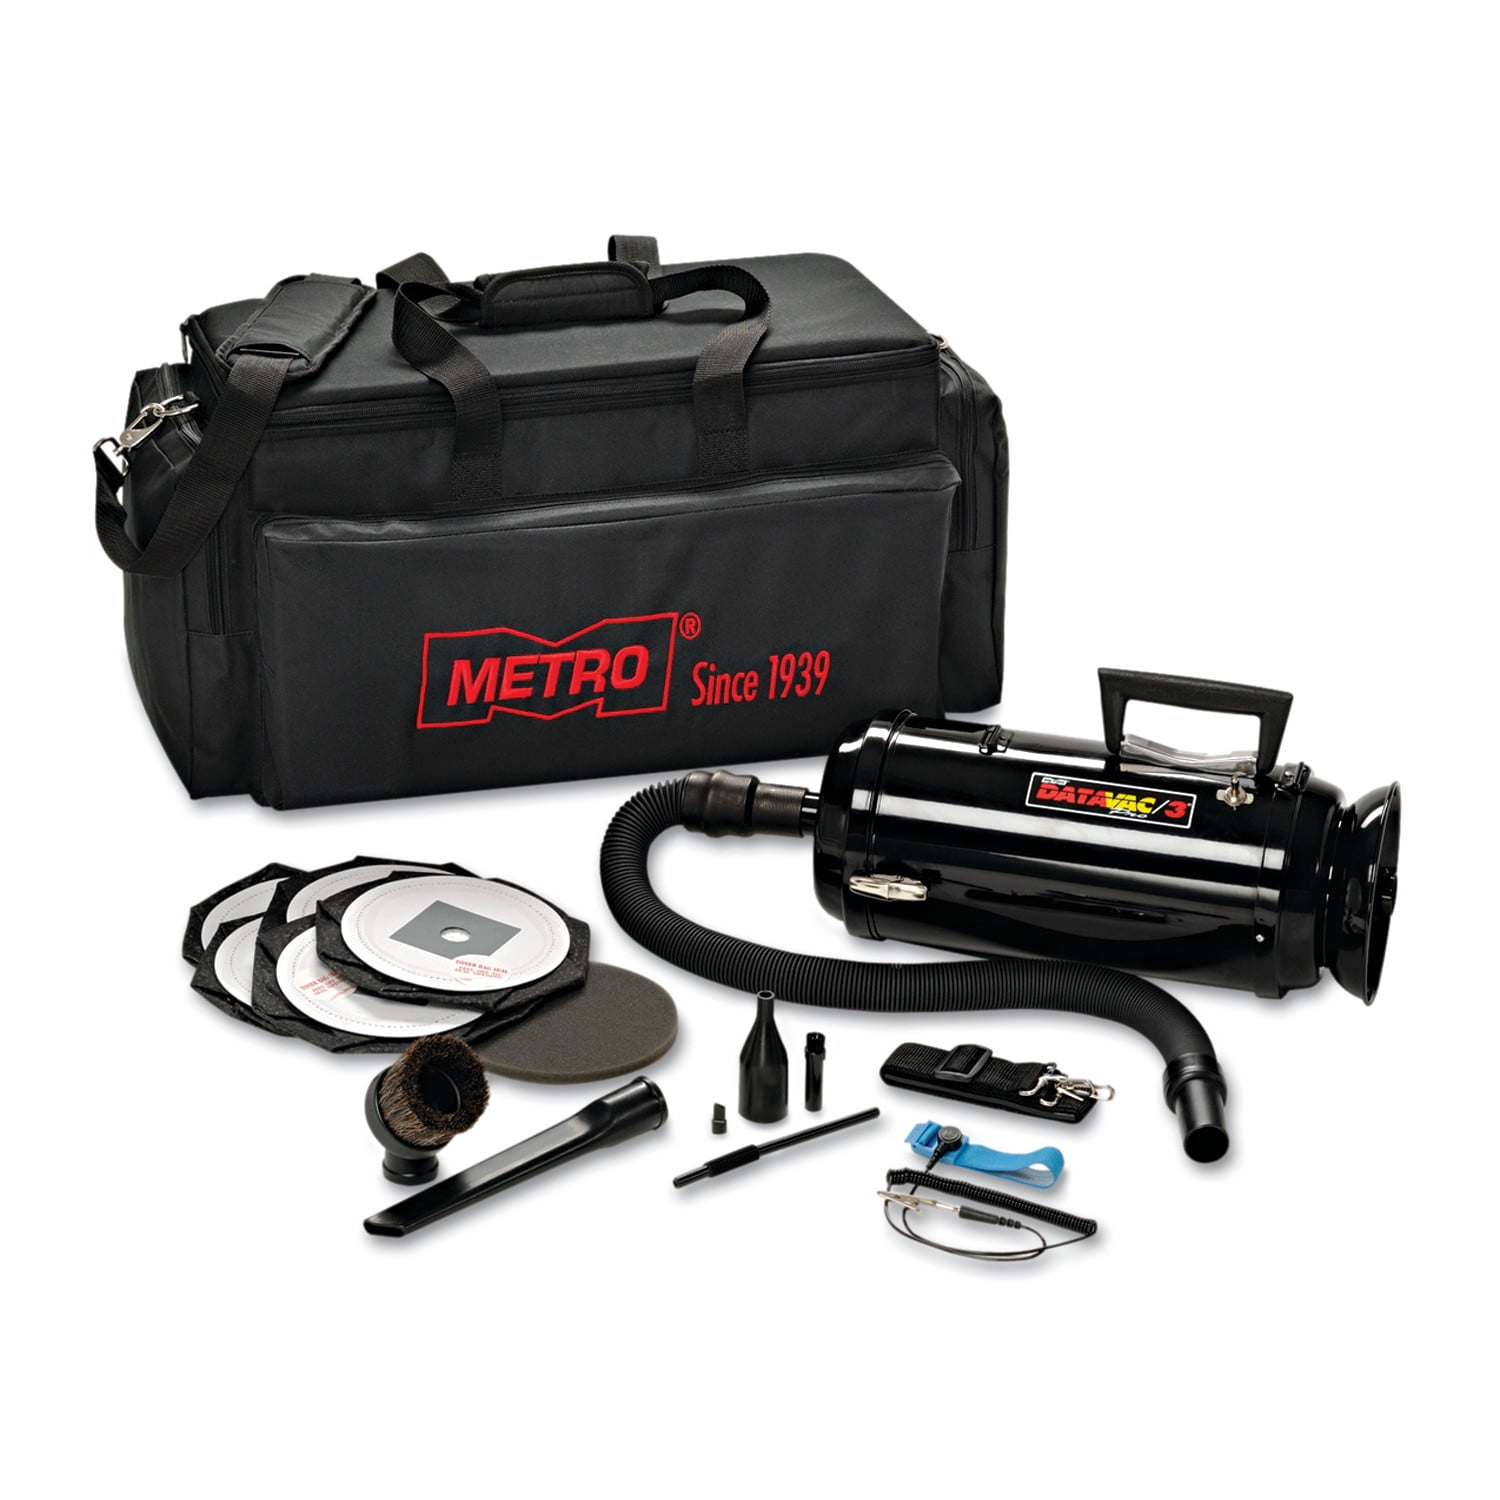 Metro Vac Anti-Static Vacuum/Blower Includes Storage Case Hepa & Dust Off Tools Product Category Office Equipment Cleaners/Electronics Equipment Cleaners Datavac